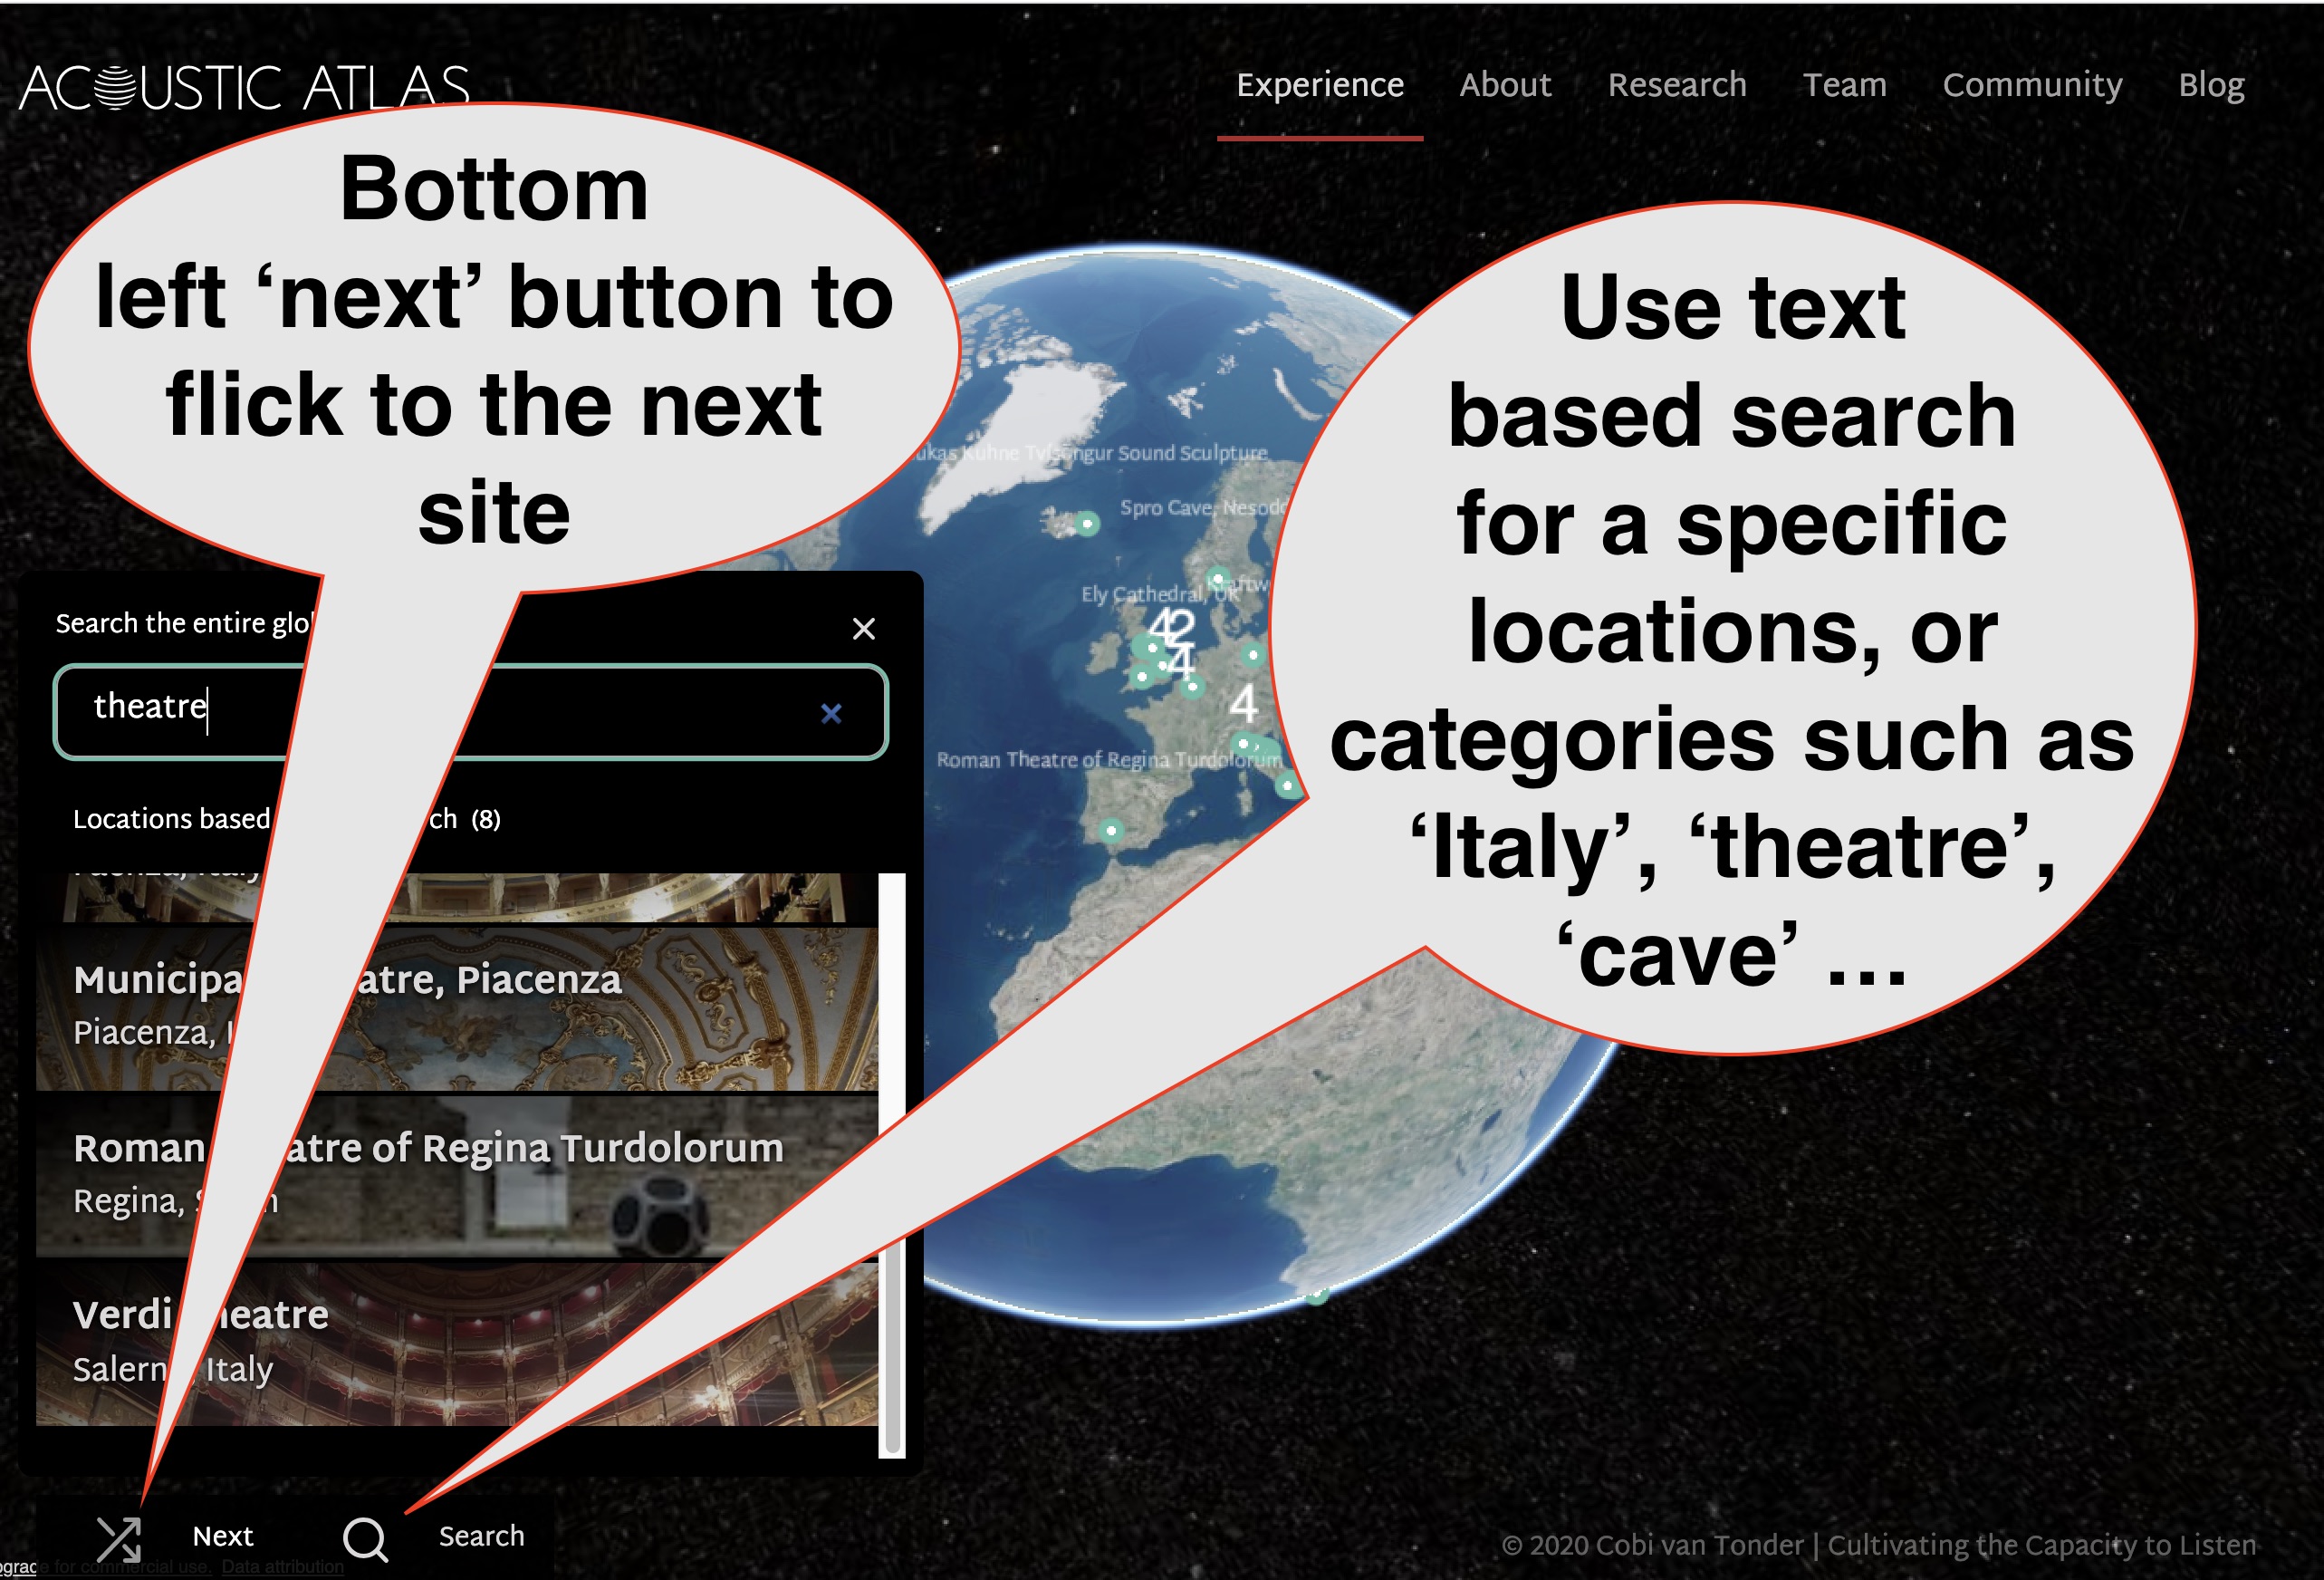 find the 'next' button in the bottom left to flick to the next site or use the 'search' button next to it to search via text according to category i.e. theatres or cathedras or caves or location i.e.Italy or Africa